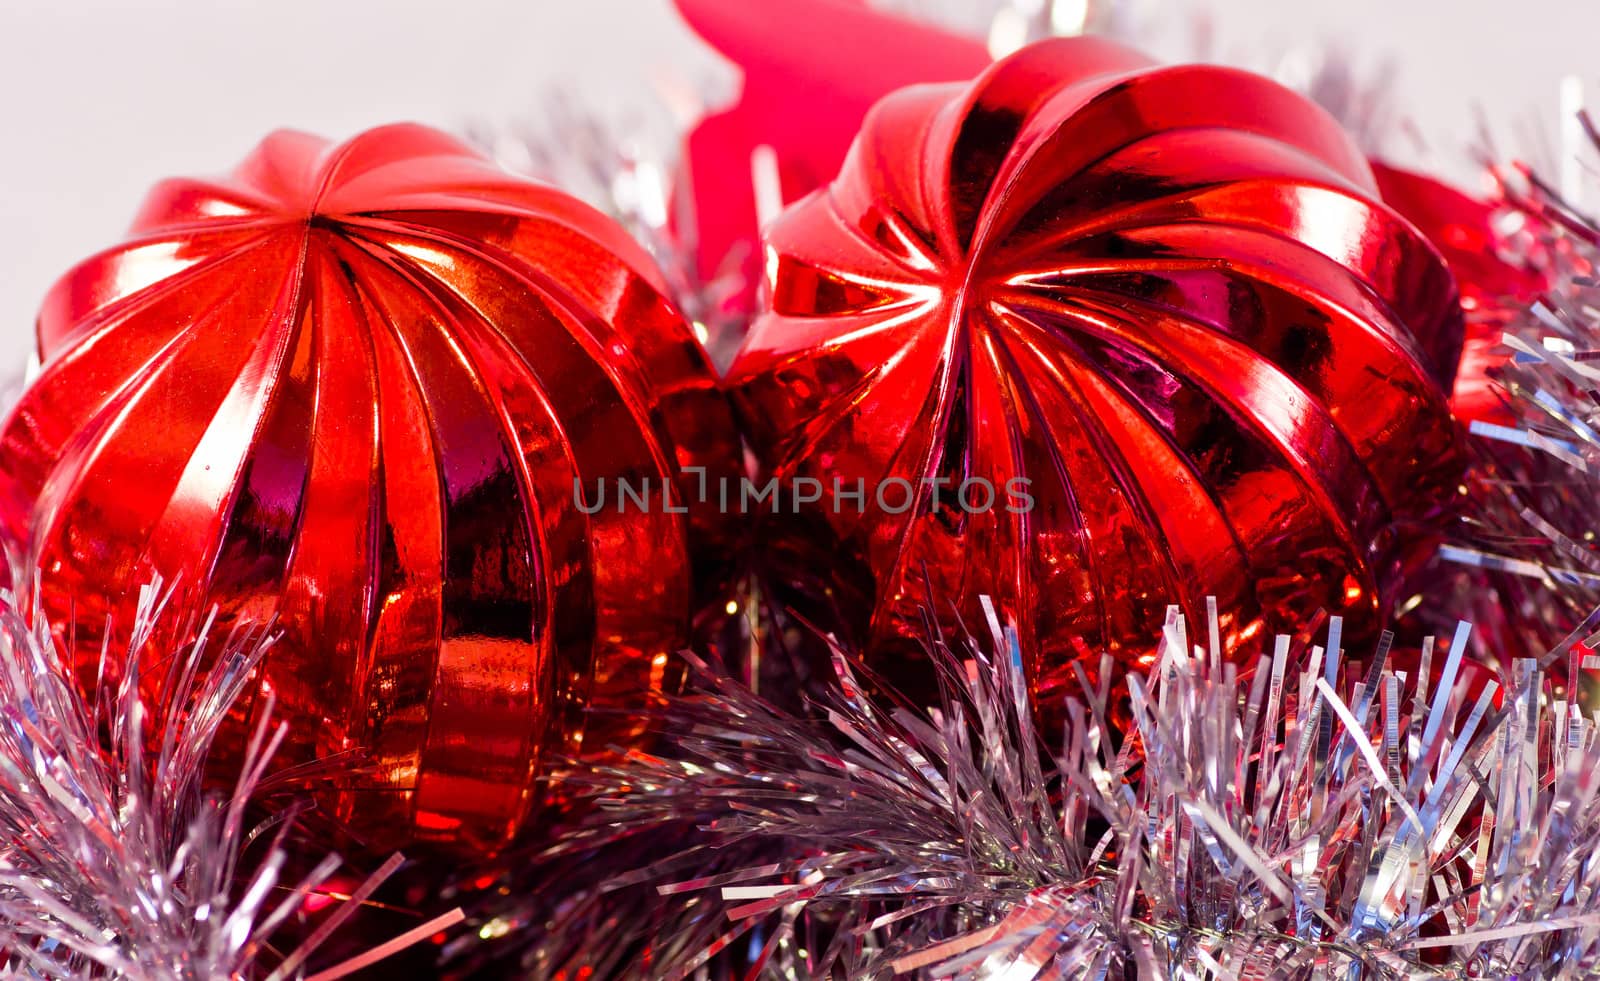 typical decoration of Christmas days in silver and red colors